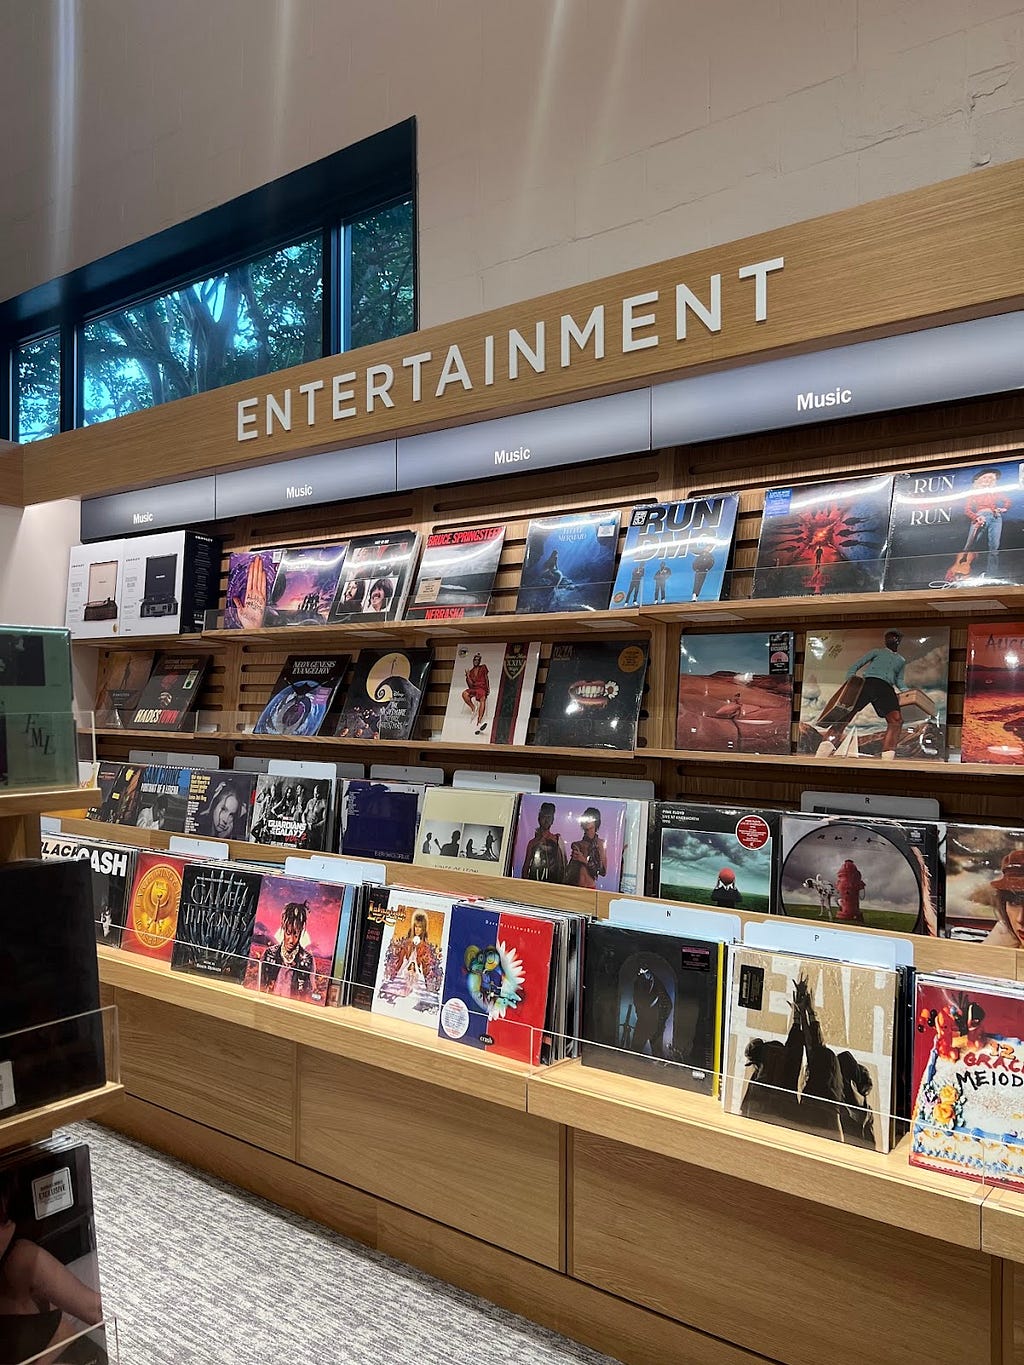 An image of the entertainment section of Barnes and Noble, containing vinyl records.